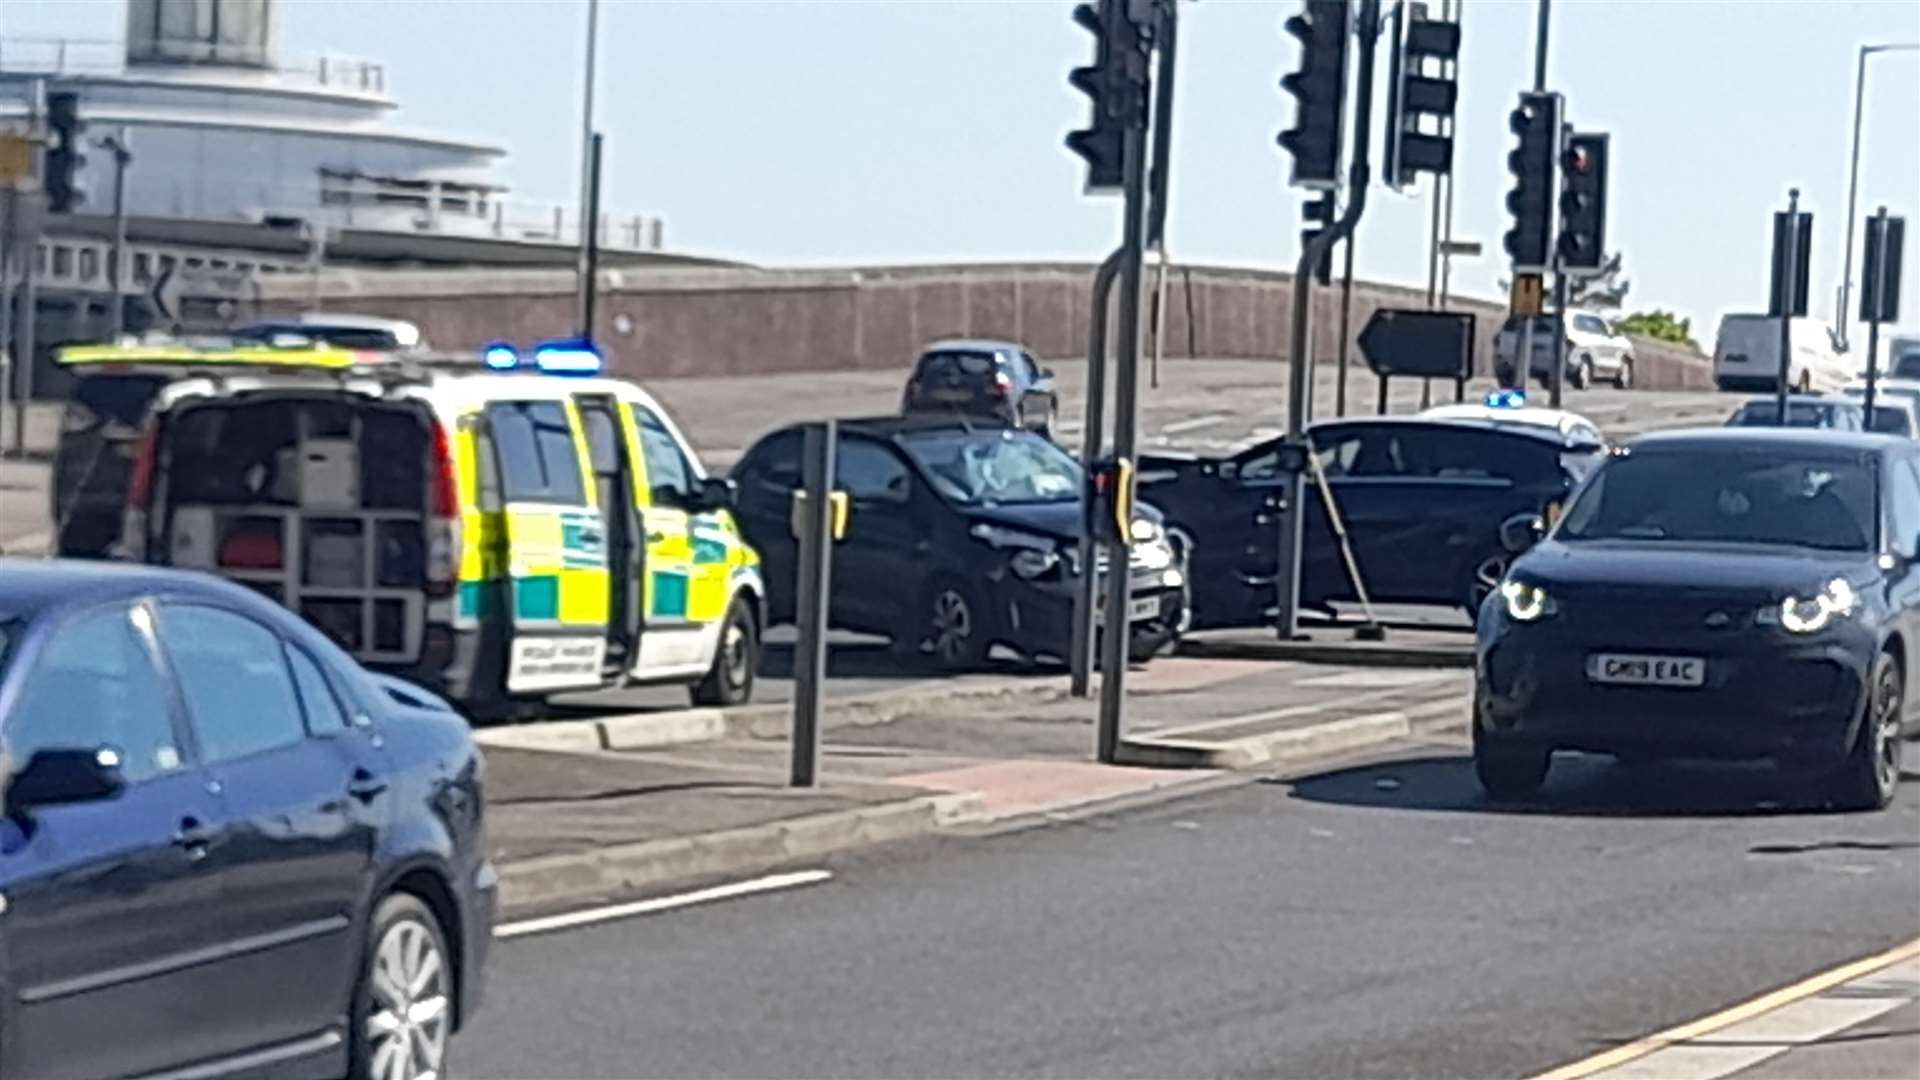 The crash has partially blocked the Station Road junction, causing delays for drivers in the area